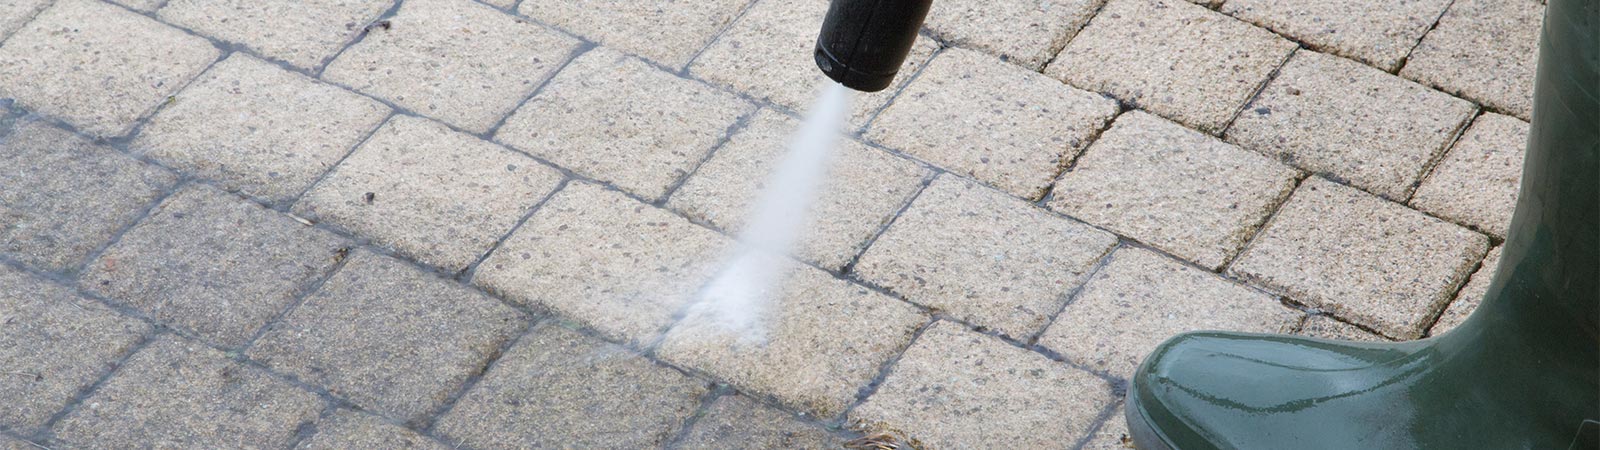 Residential Pressure Cleaning